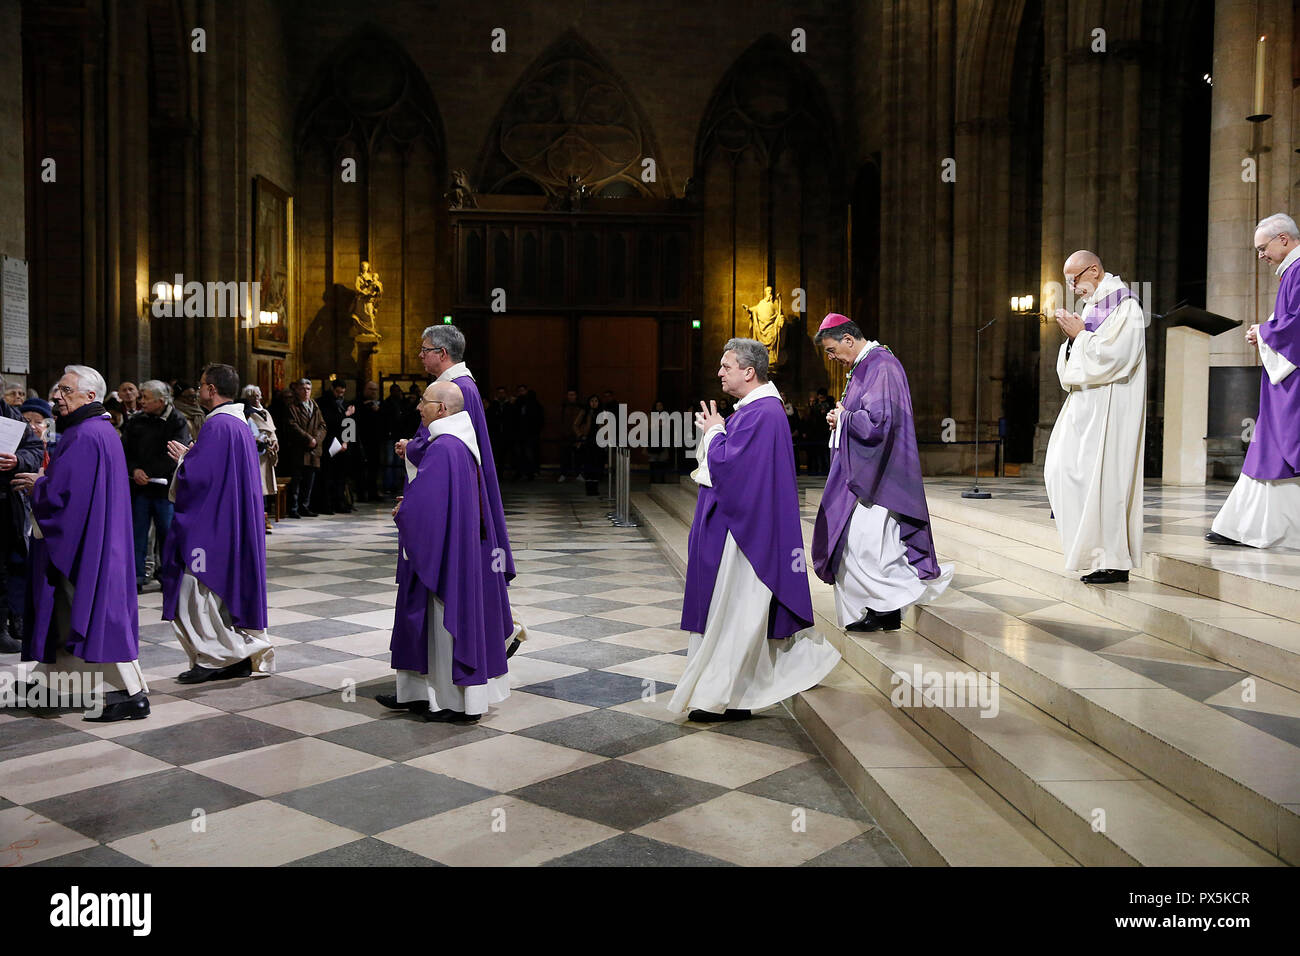 Ash wednesday celebration at Notre Dame cathedral, Paris, France. Exit procession. Stock Photo